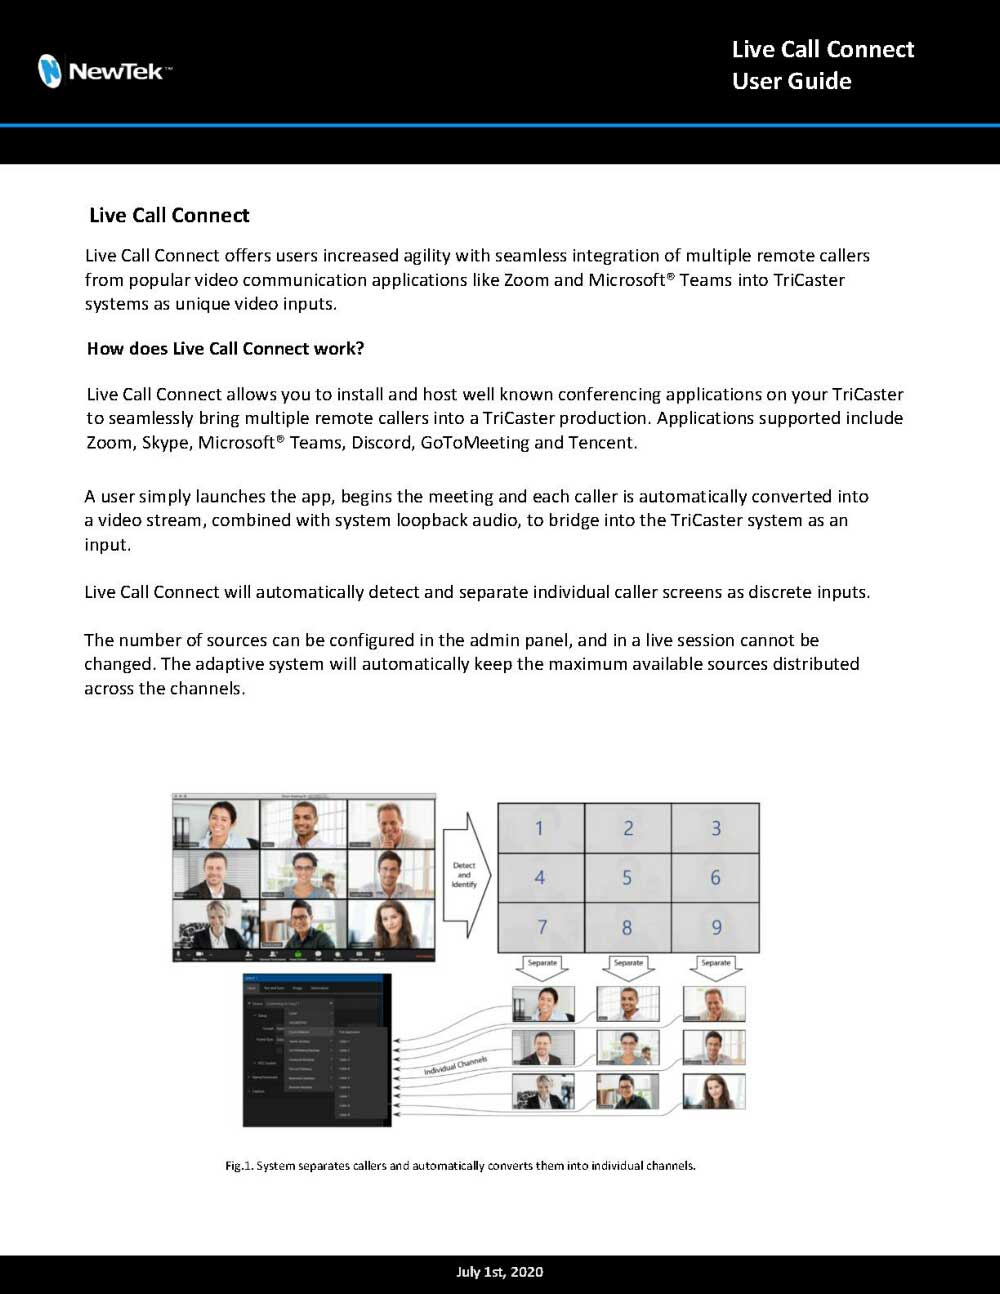 NEWTEK LIVECALL CONNECT USER GUIDE V.2 2020/07